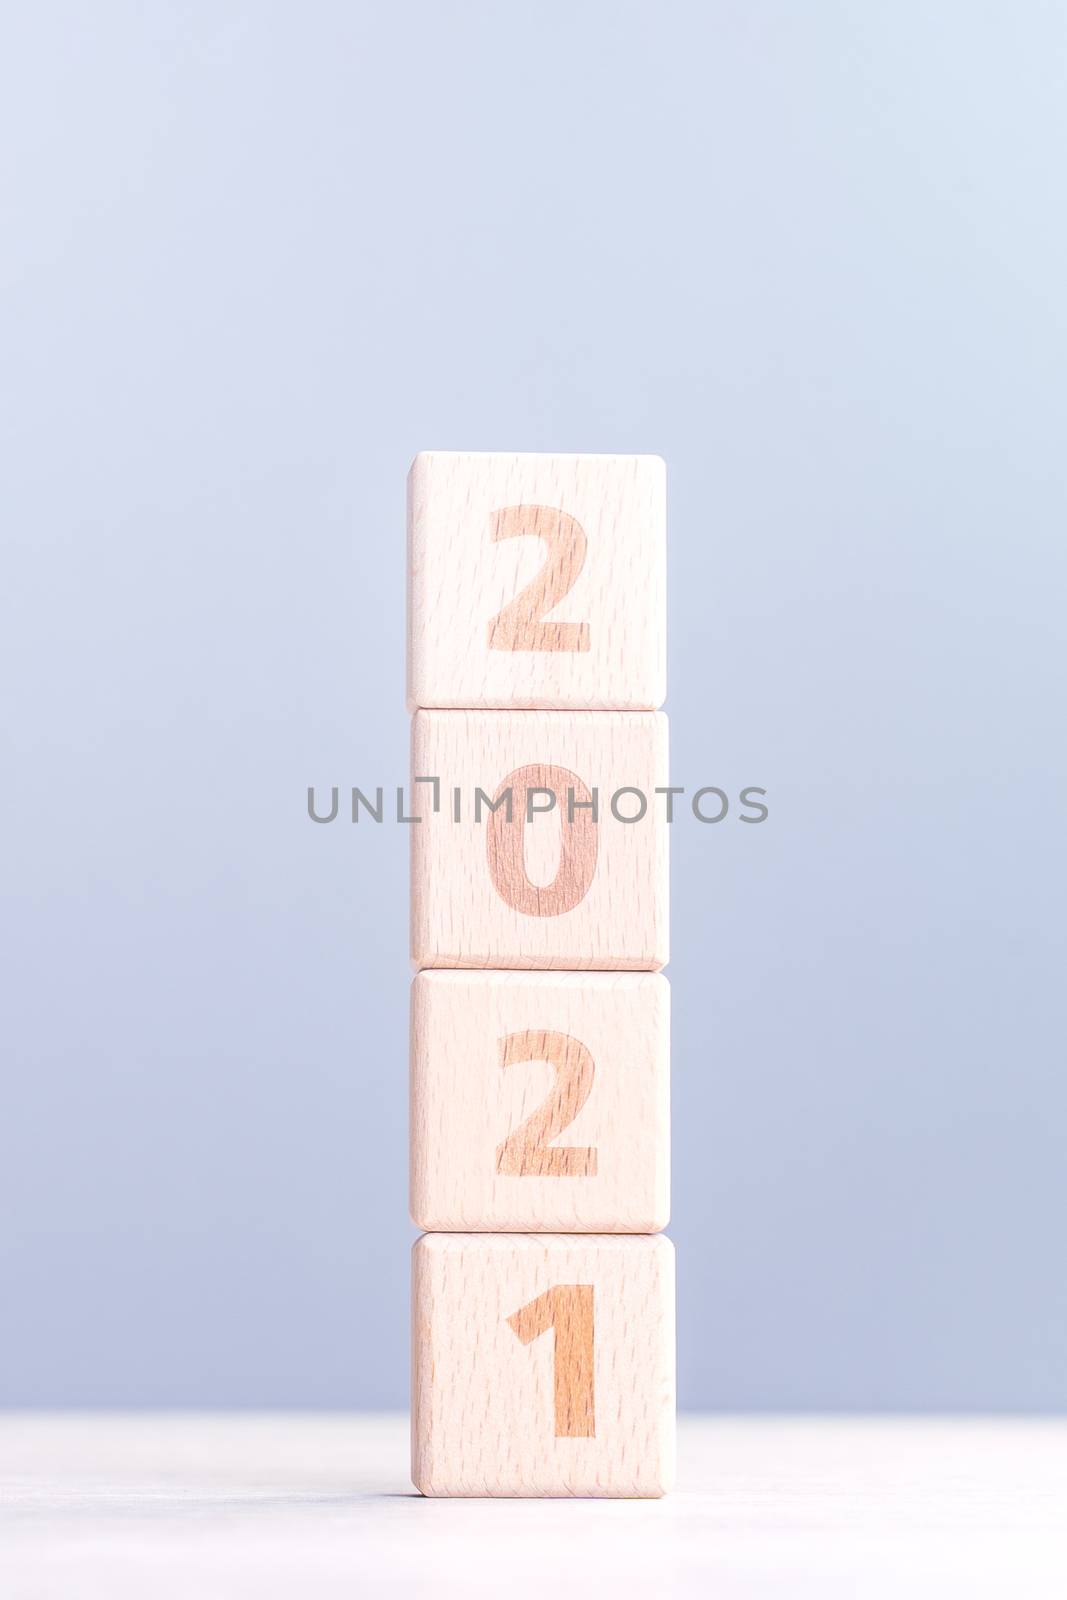 2021 New Year abstract design concept - Number wood block cubes isolated on wooden table and light mist blue background.